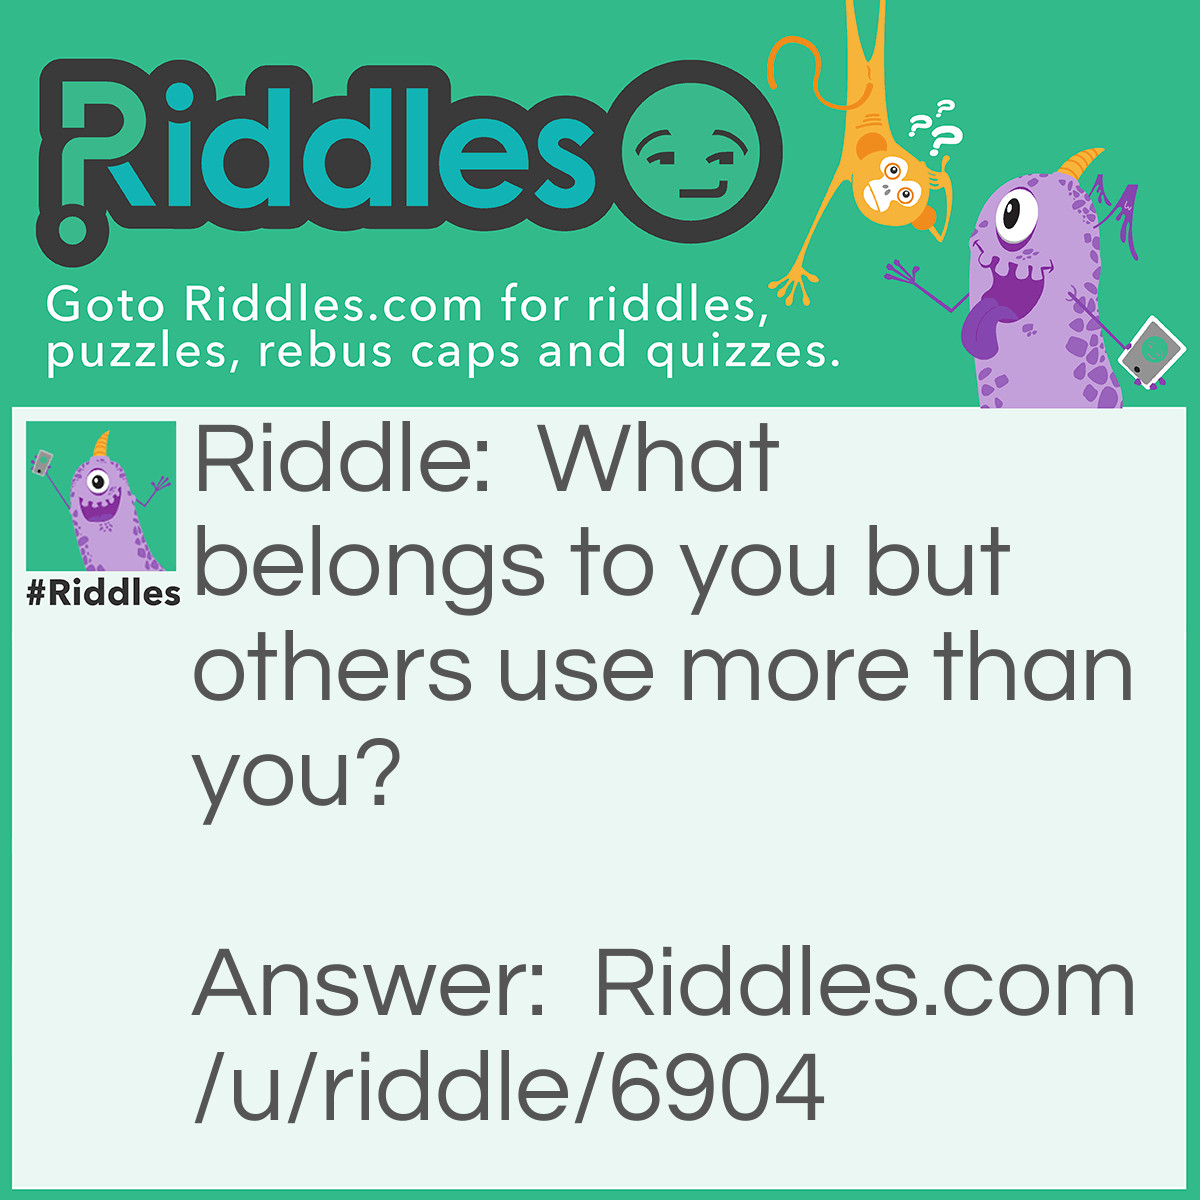 Riddle: What belongs to you but others use more than you? Answer: Your name.